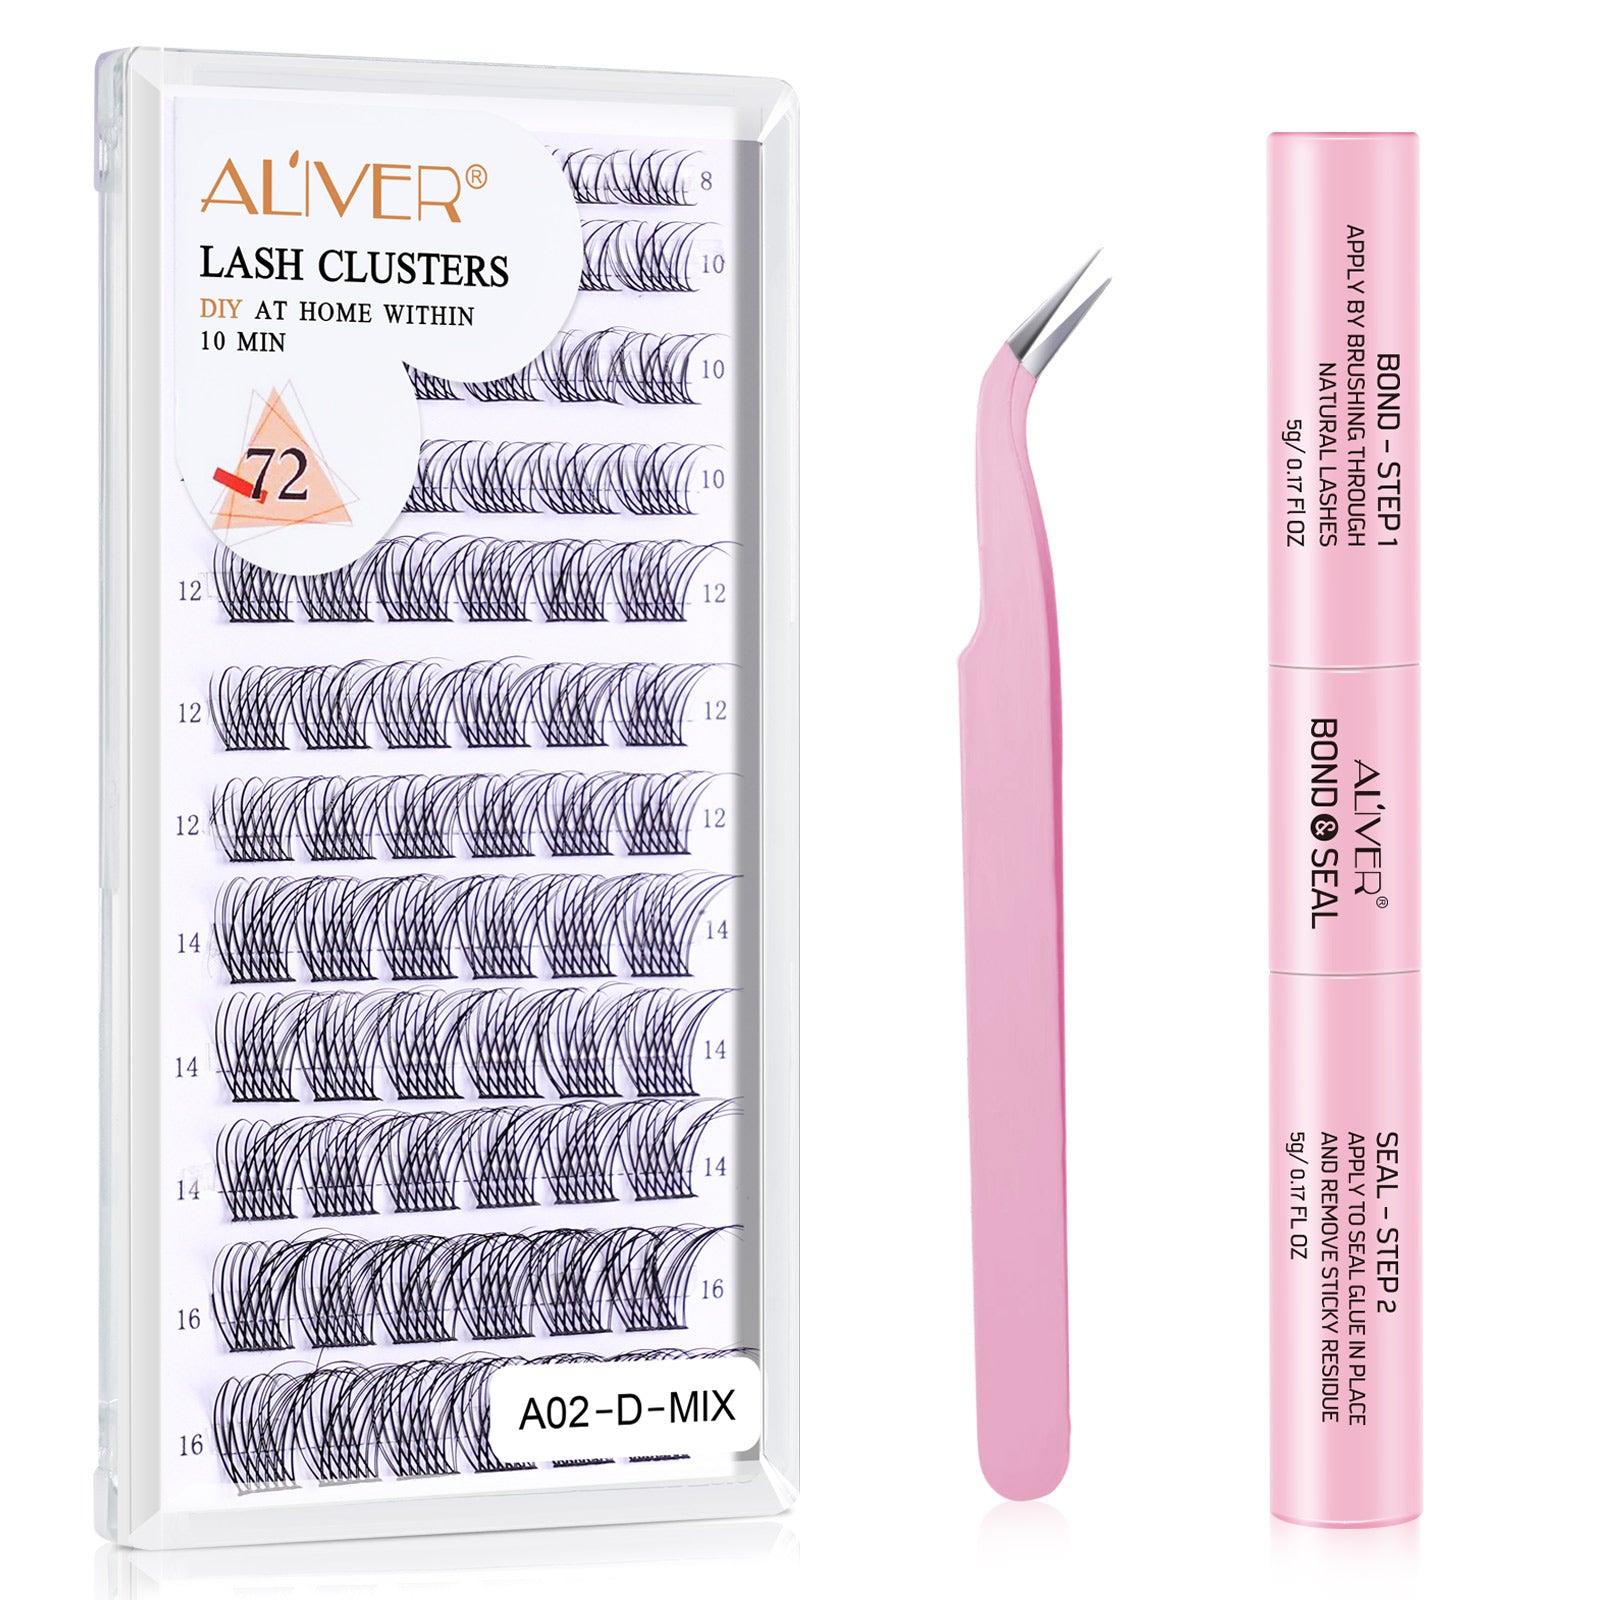 Aliver Lash Clusters A04(72) False Eyelash Extensions Kit 72 Clusters  10-16MM with Eyelash Adhesive, DIY Eyelash Extensions at Home, Soft Fluffy  Curled & Long Lasting 